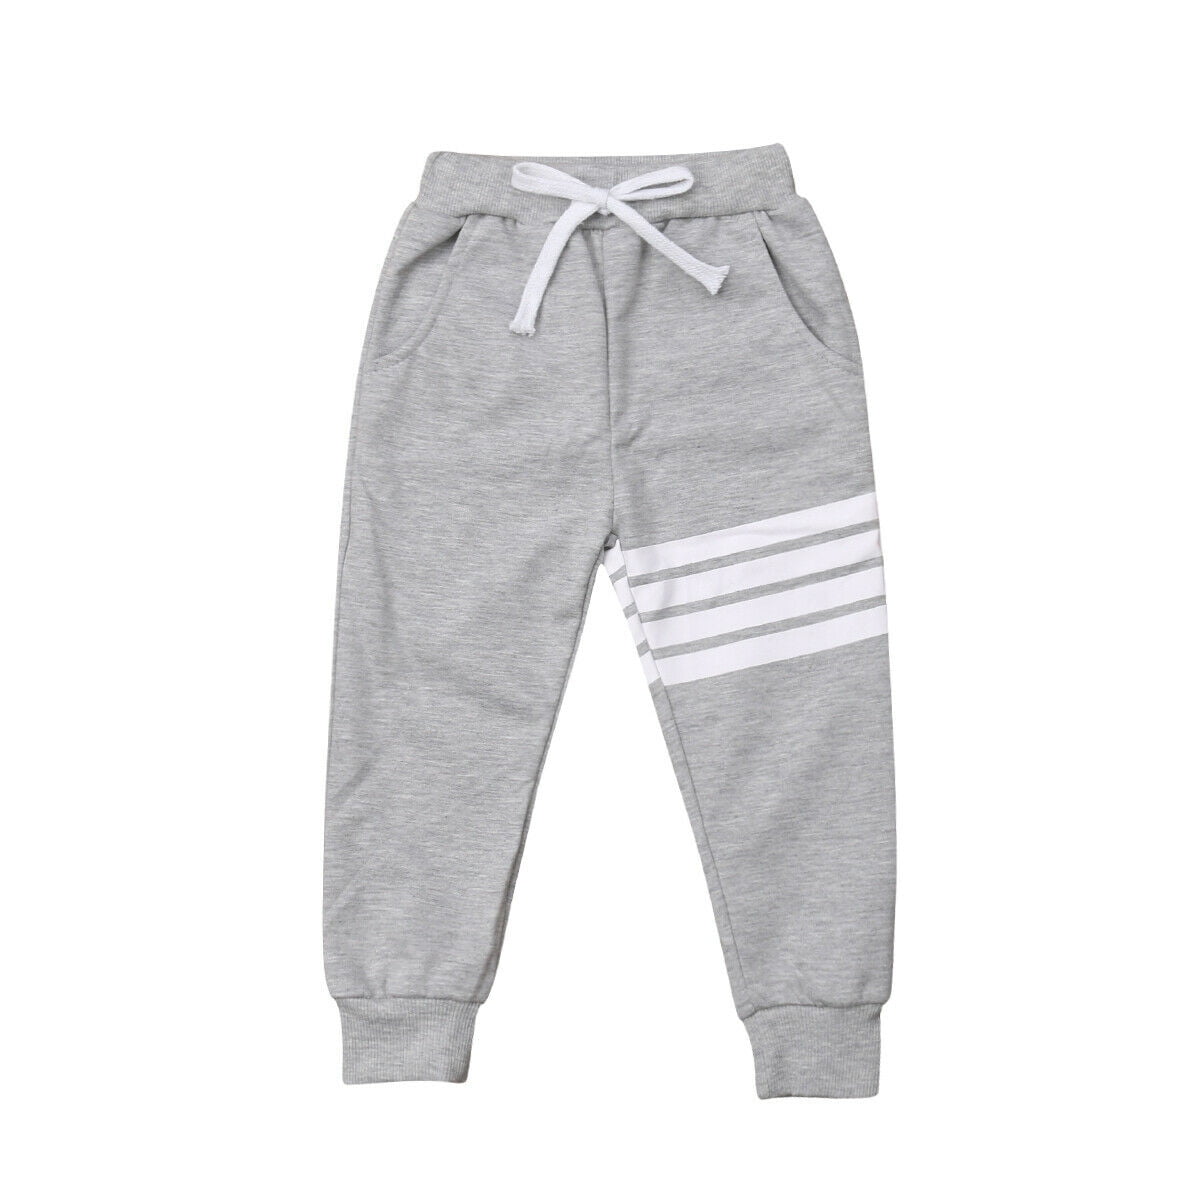 jsadfojas Kid Newest Baby Boy Loose Casual Sports Pants Toddler Sweat Pants Joggers Elastic Bottoms Outfit 